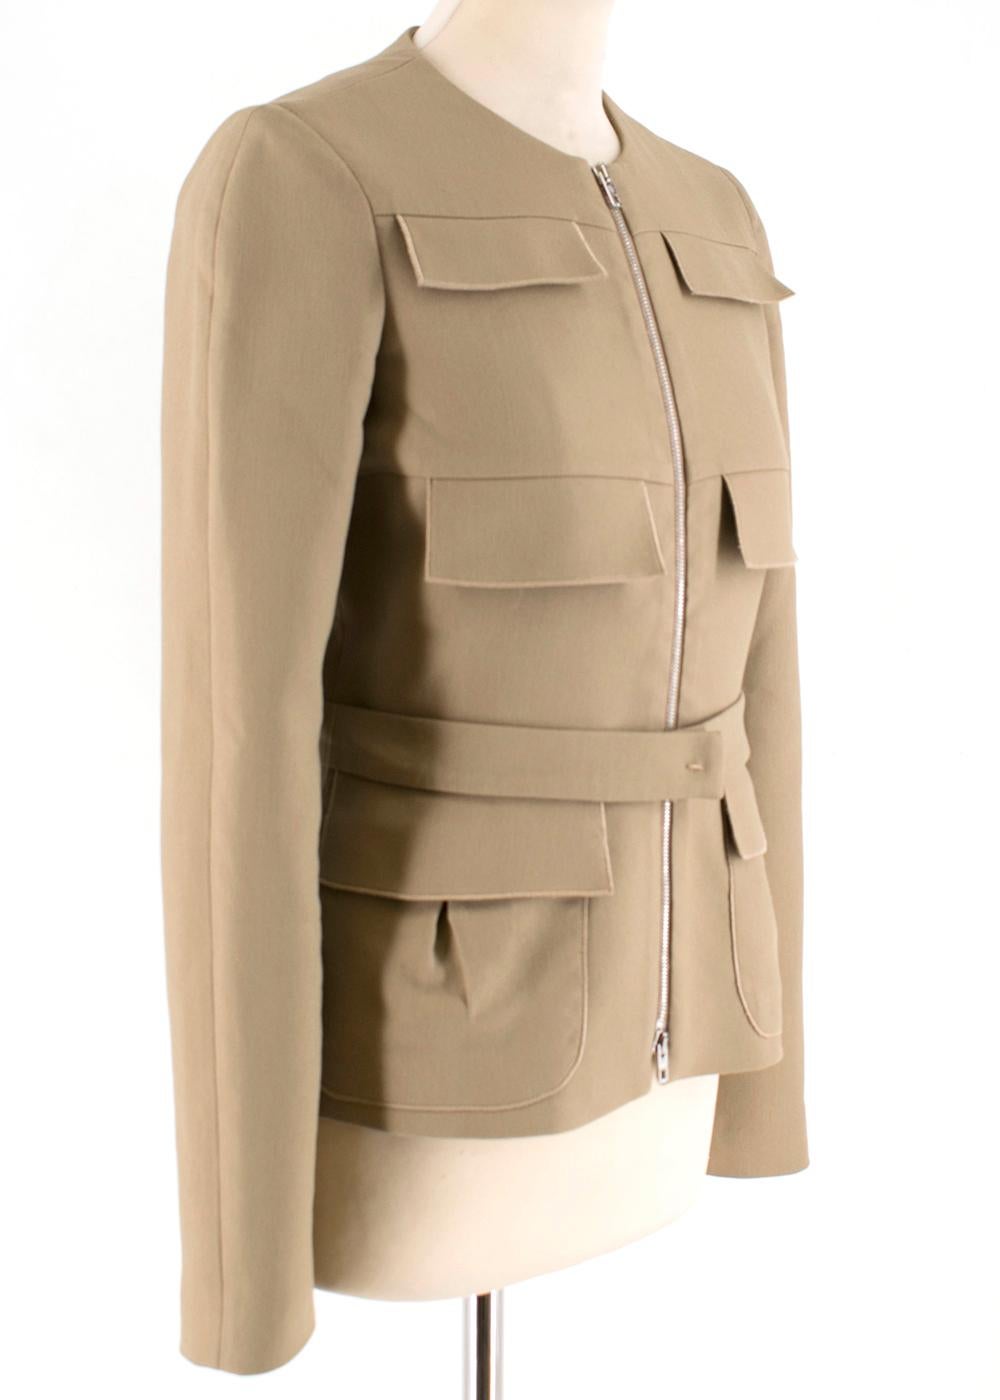 Giambattista Valli jacket is designed with utilitarian-style flap pockets. Cut for a slim fit and has a detachable belt to accentuate a smaller waist.

Please note, these items are pre-owned and may show signs of being stored even when unworn and